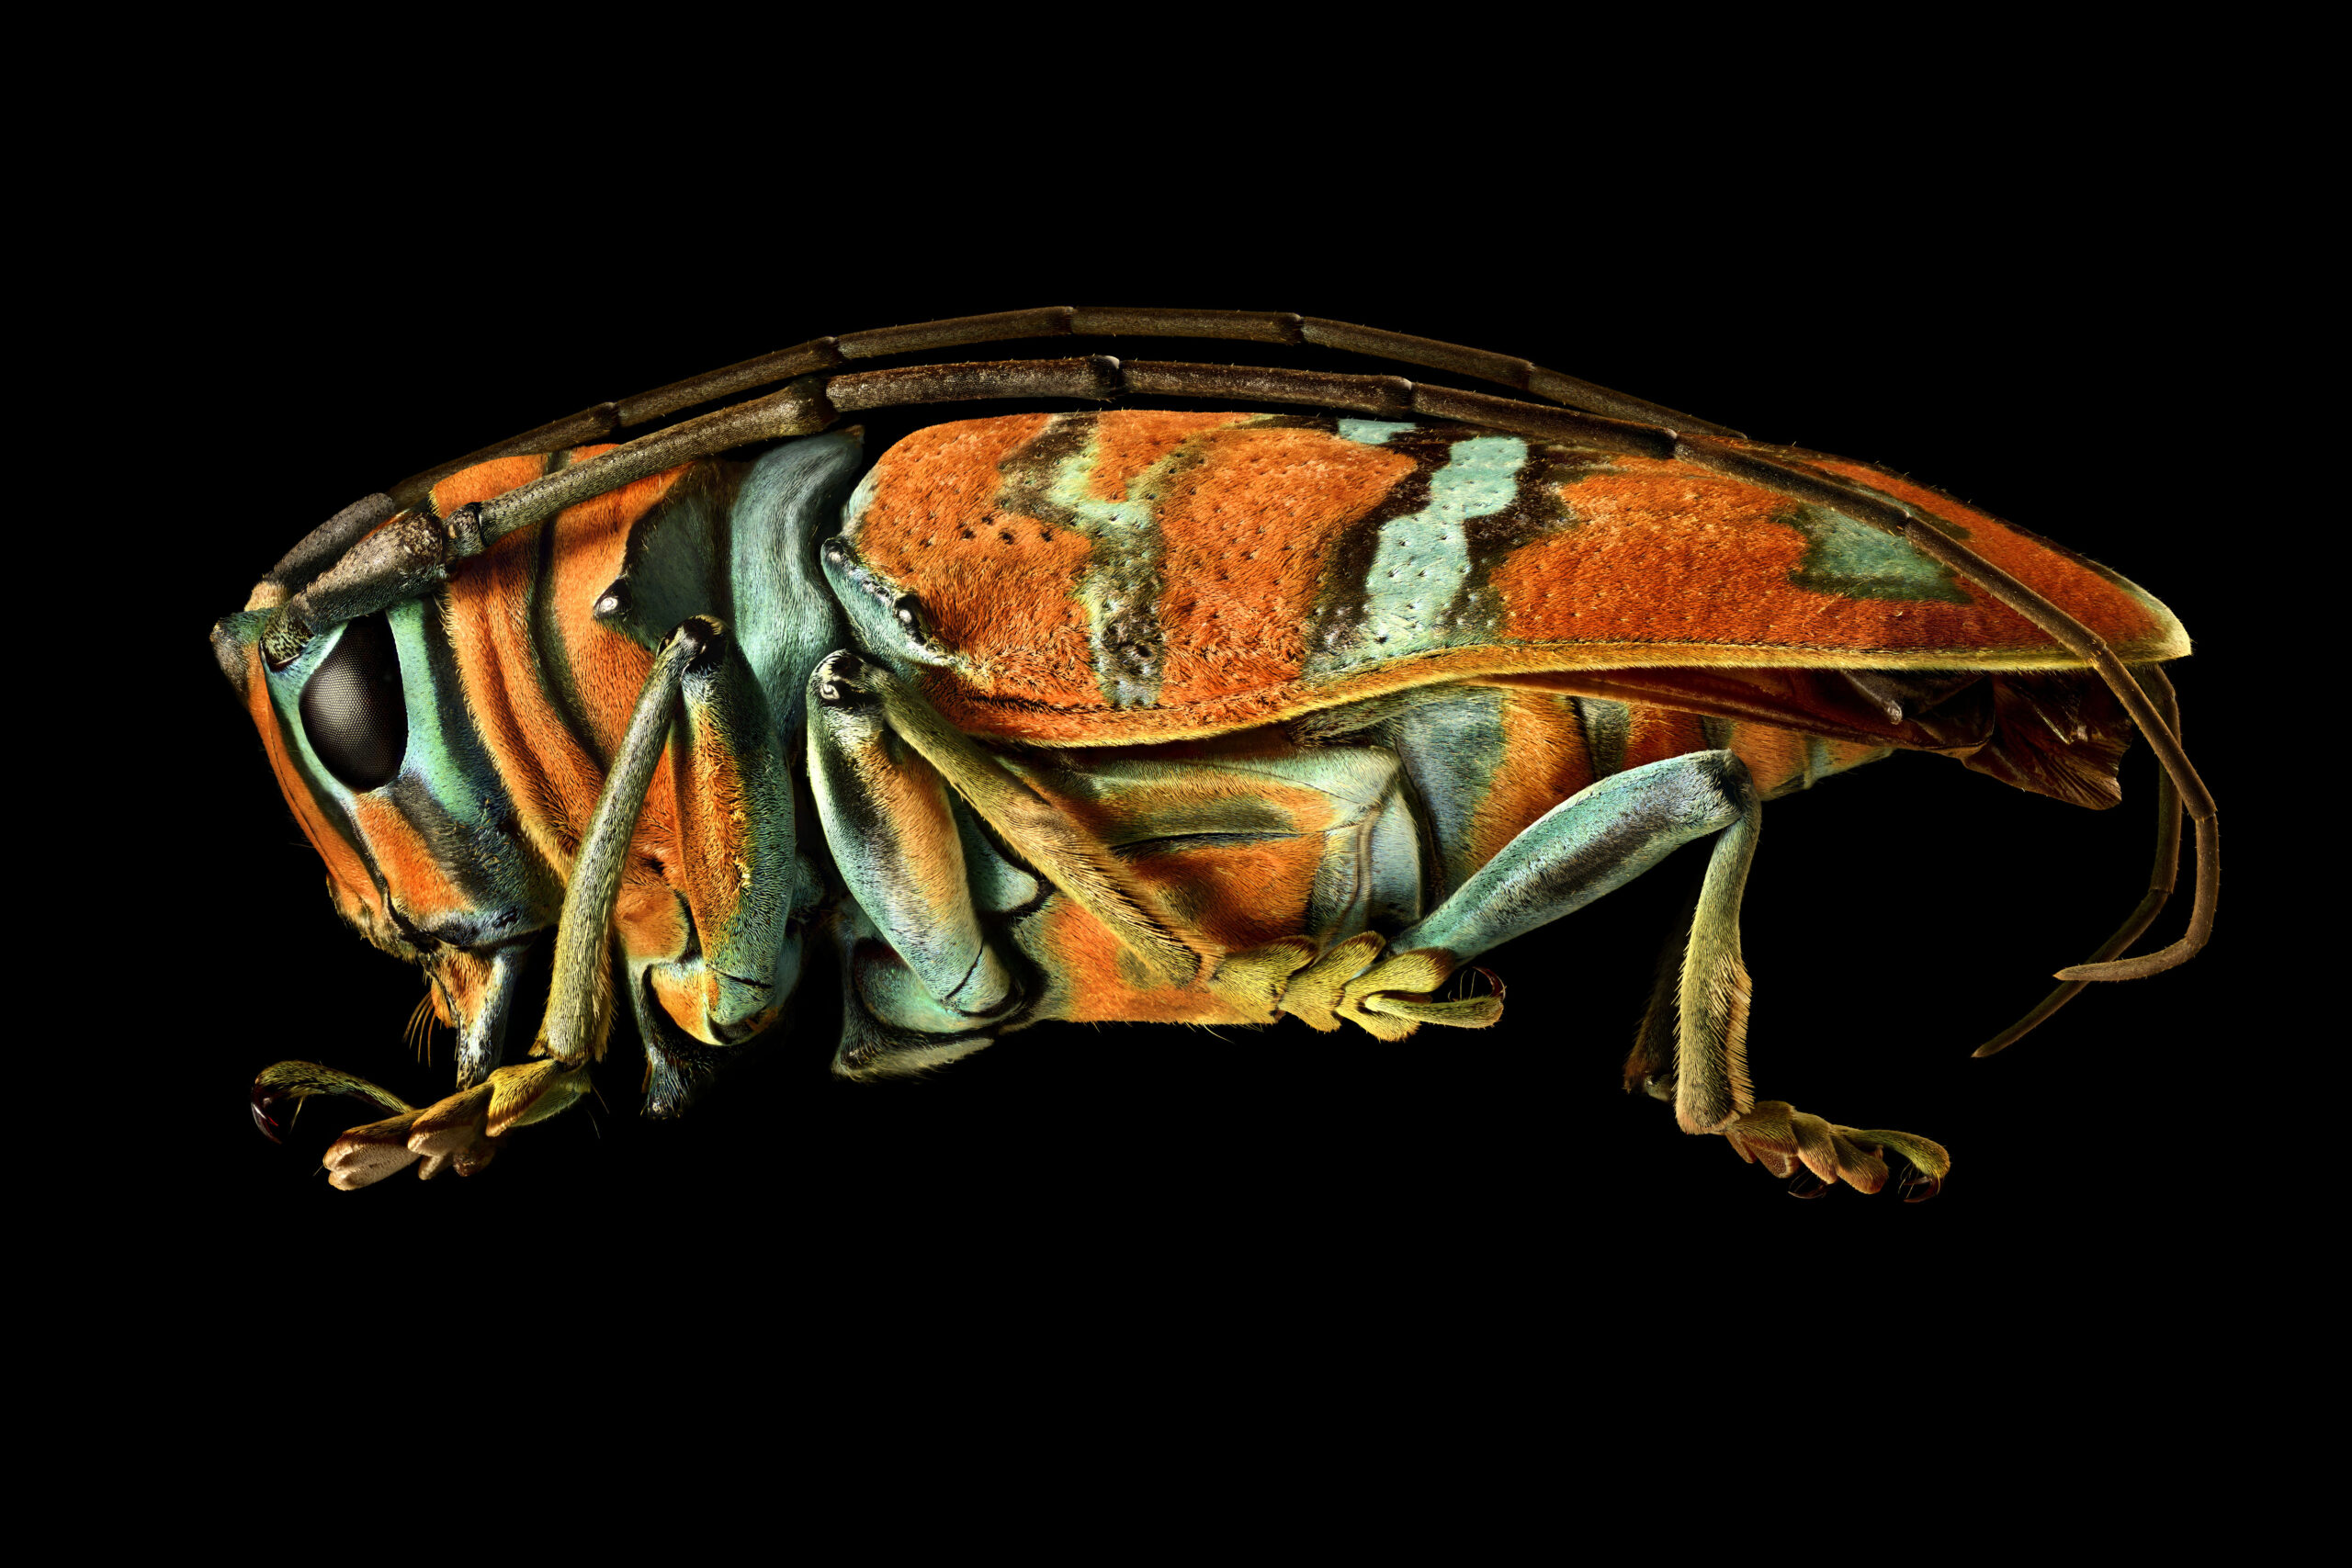 These are the most beautiful pictures of bugs you will ever see